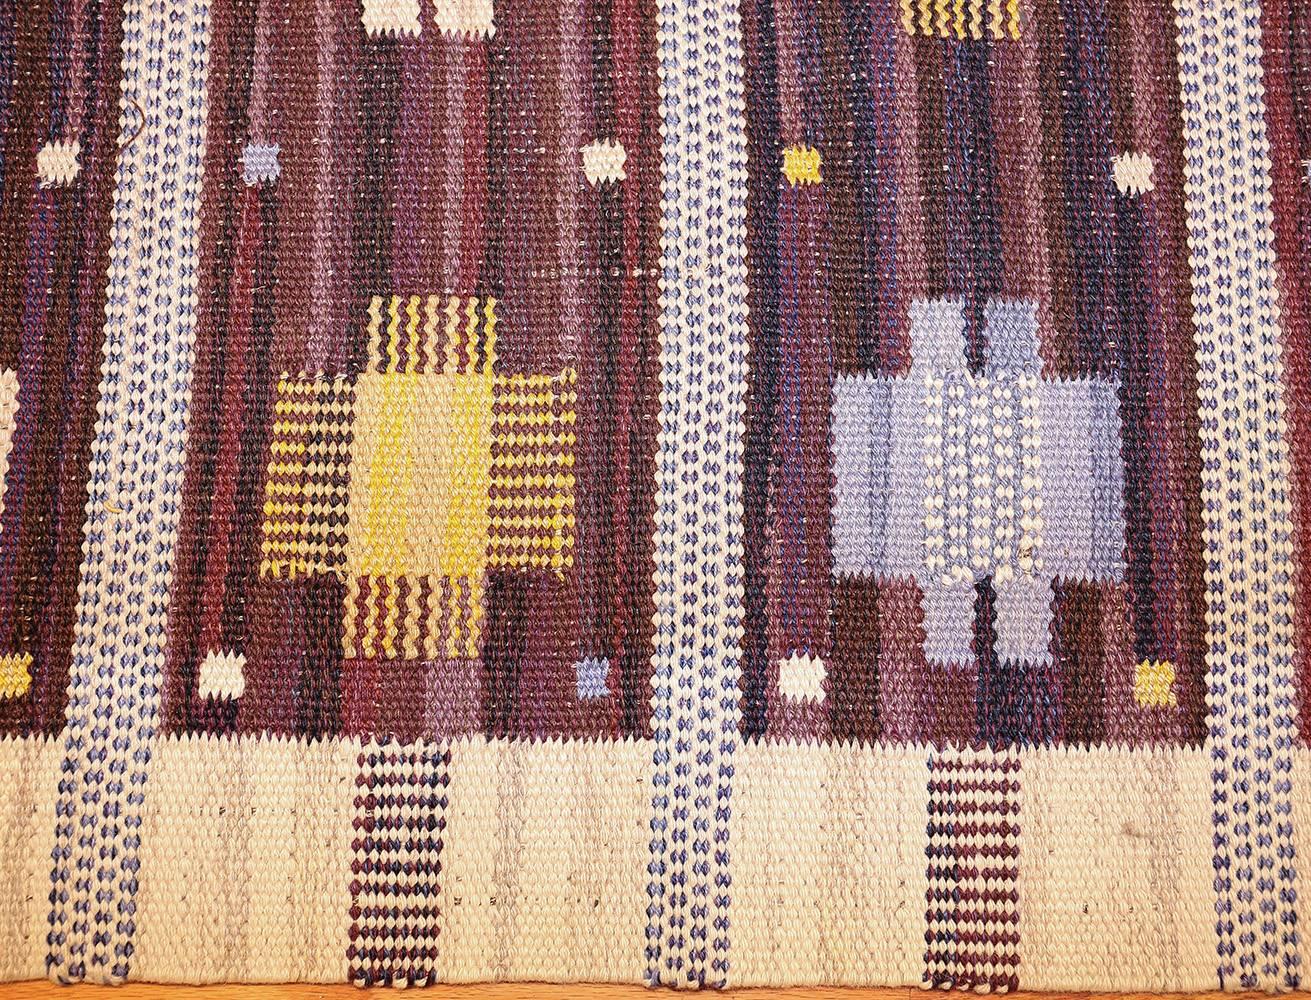 Swedish rugs – Swedish rugs and carpets have a long history in Scandinavian weaving which reaches right into the Modern period. An established form of Swedish folk weaving, “Rollakans” were used as coverlets or flat woven tapestry rugs. Swedish rugs